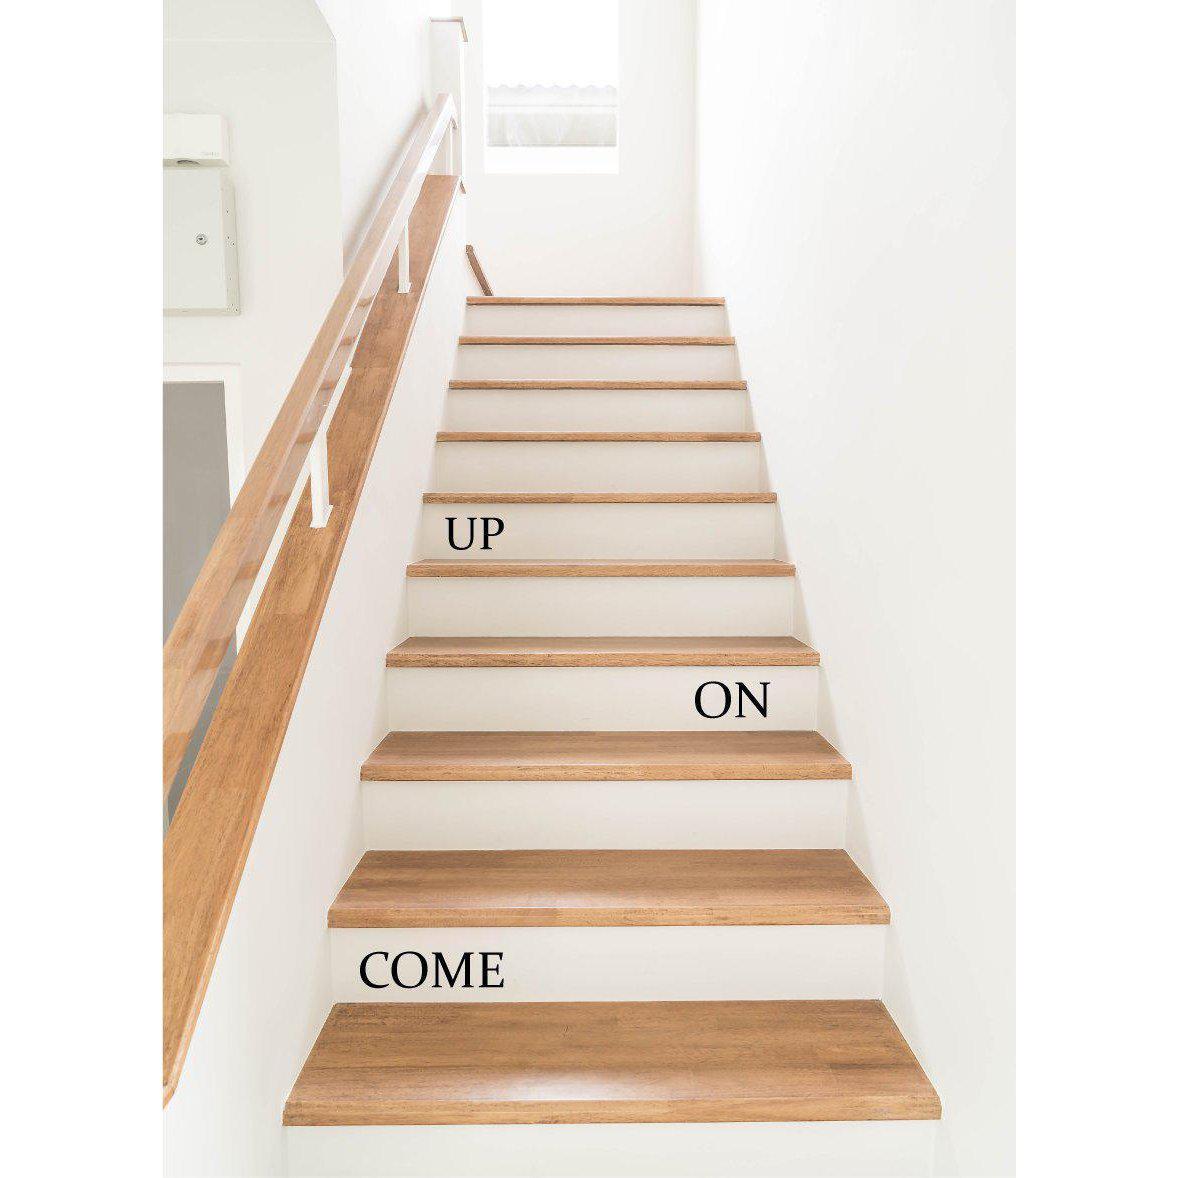 Stair Wall Stickers Stairs Wall Decals Quotes Come On Up Home Decor Vinyl Stickers For Stairs Art For Home Office Stair Riser Decals